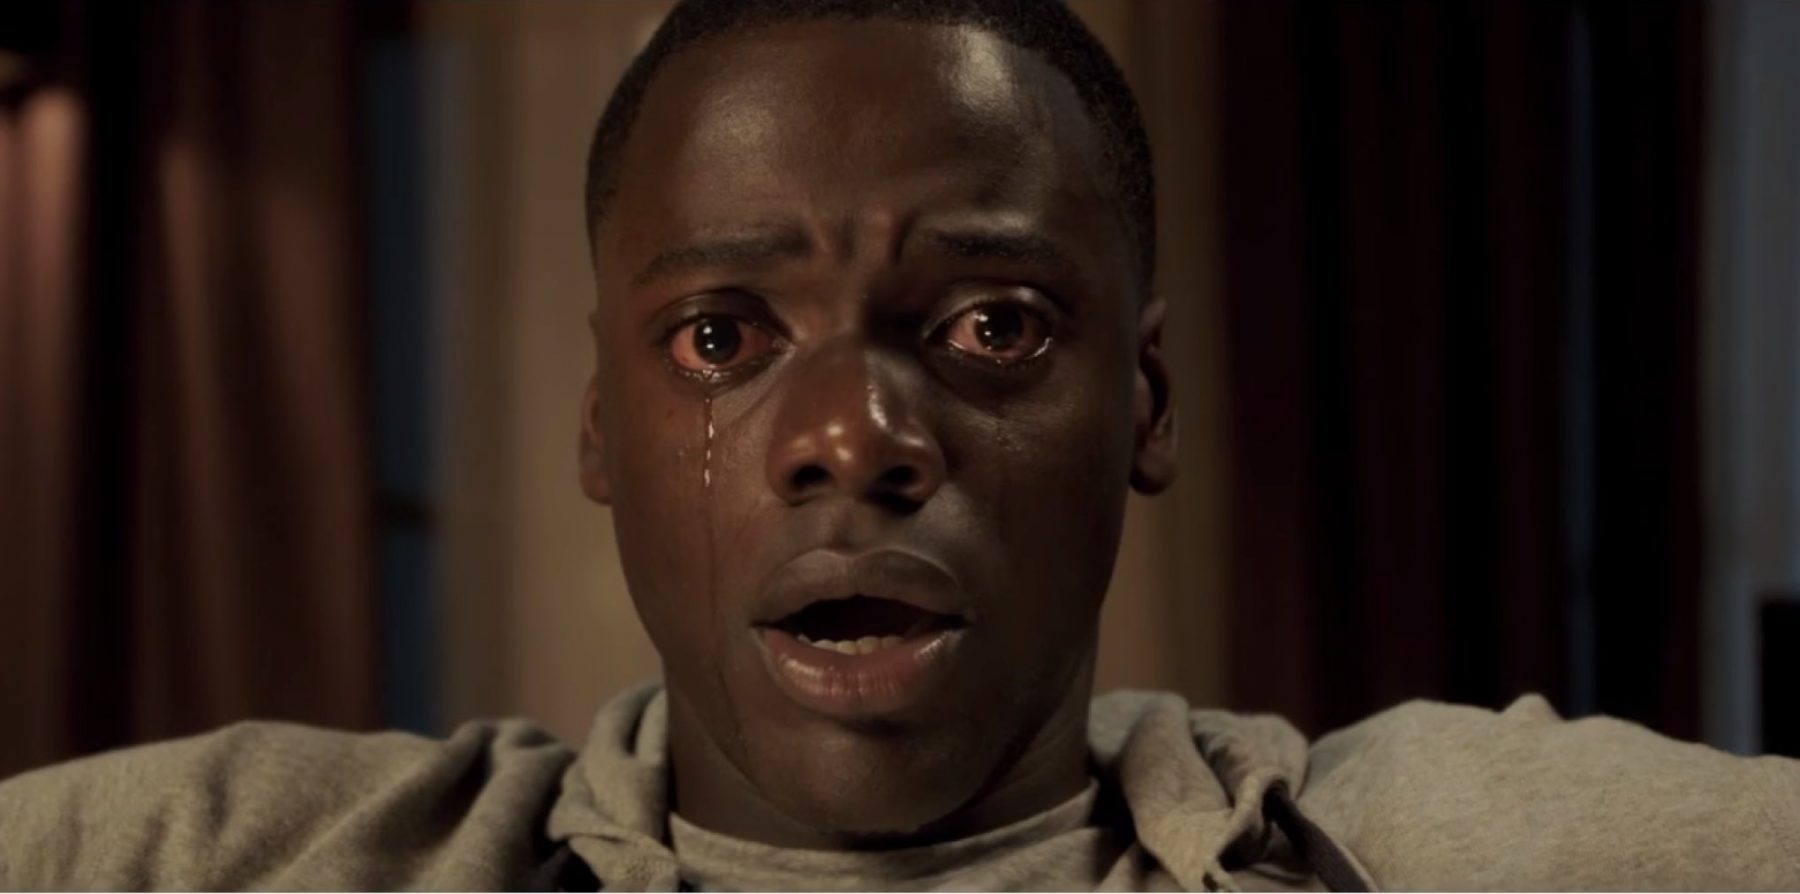 Believe the hype – ‘get out’ is terrifying